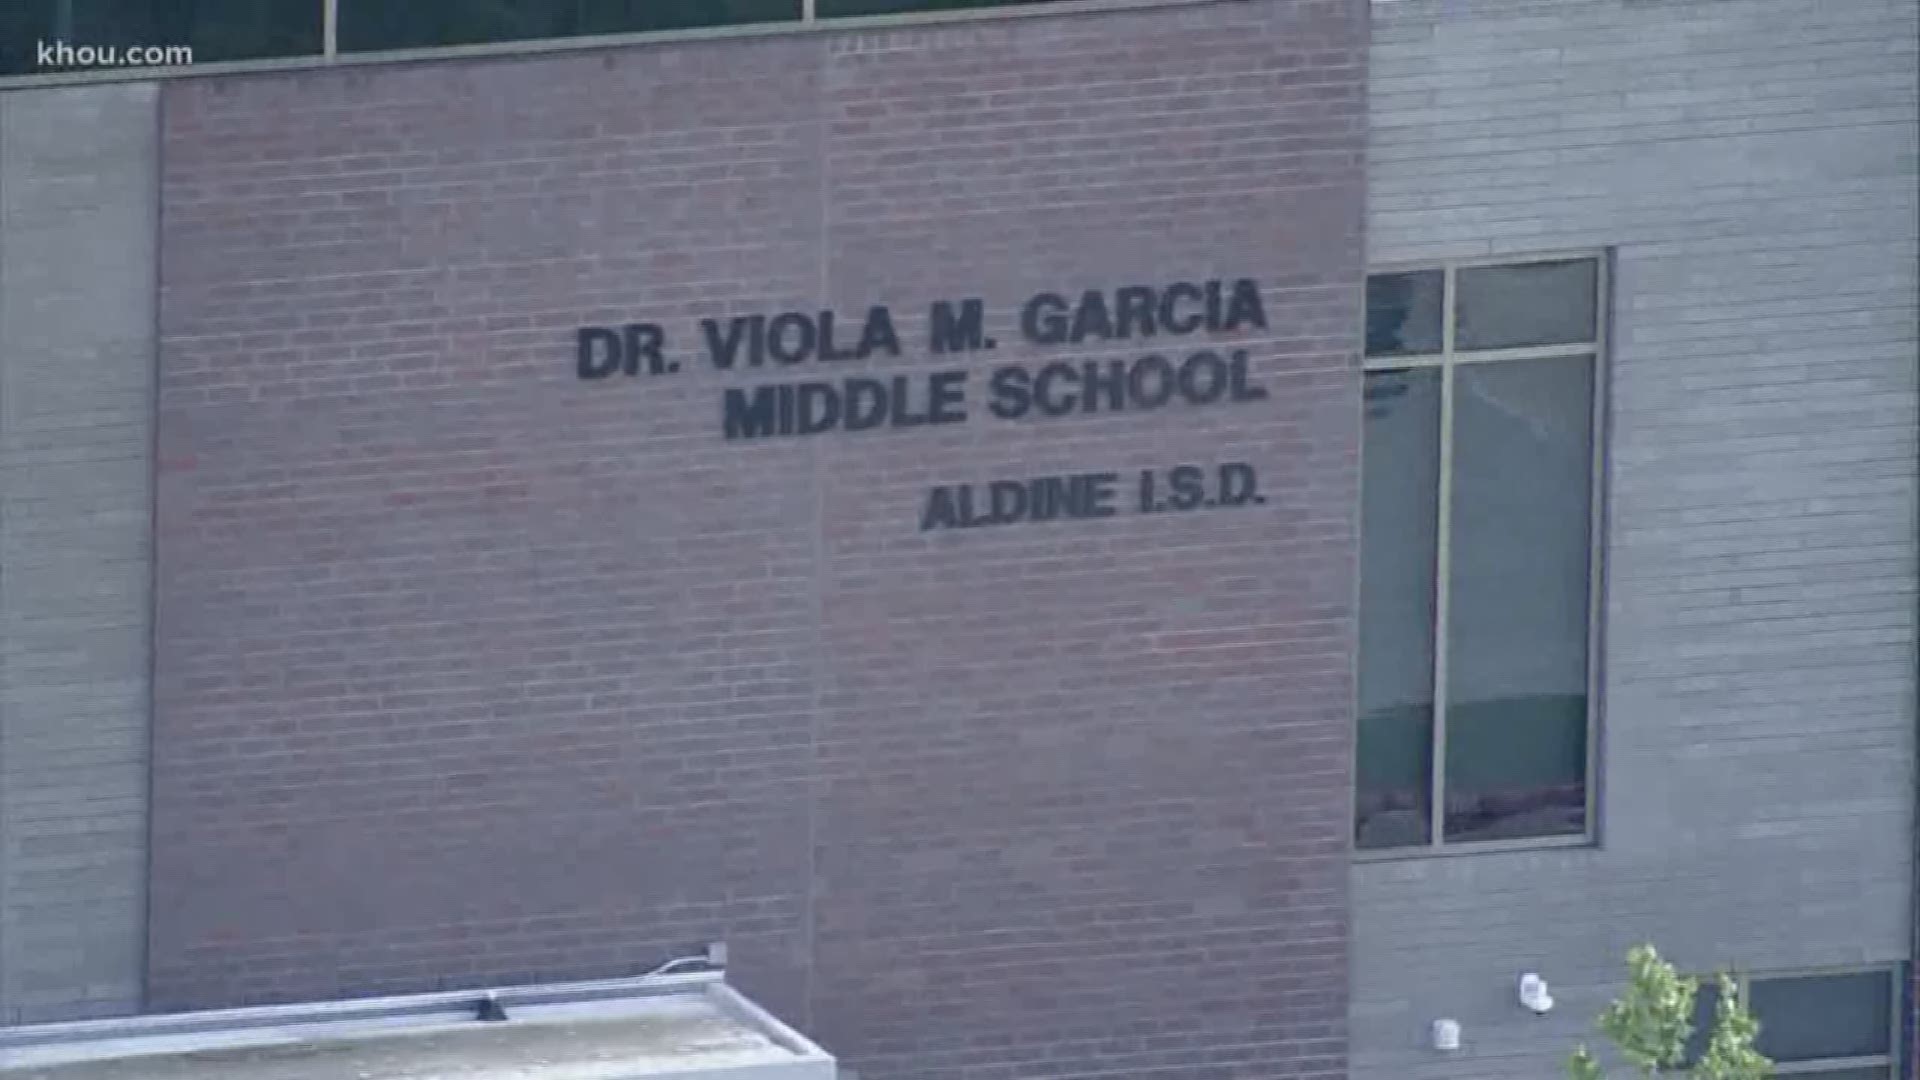 An Aldine ISD middle school student has died after collapsing in the school gym Thursday afternoon.